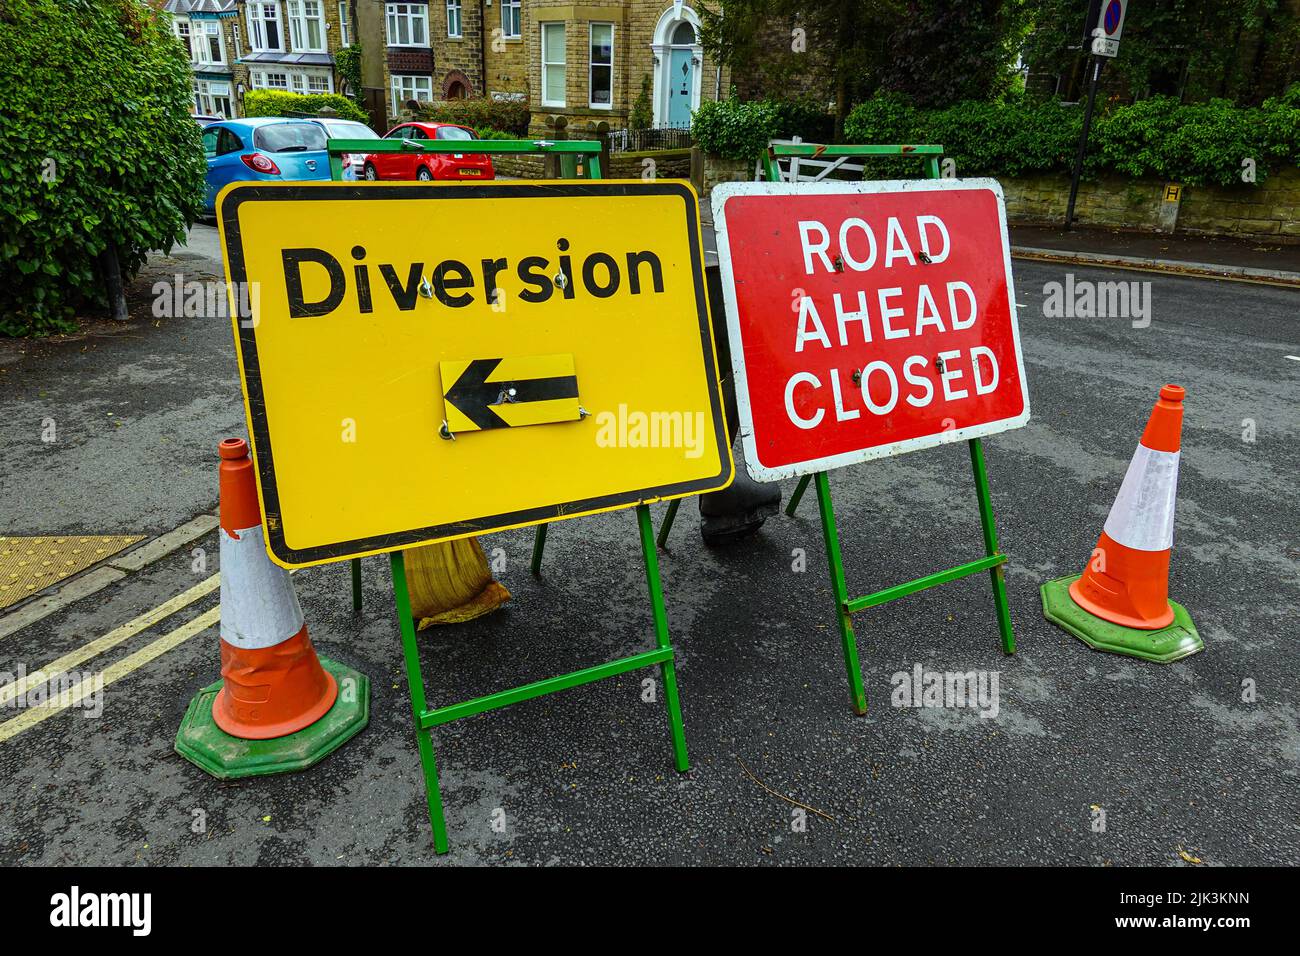 Road signs, Road Ahead Closed, Diversion, in Sheffield, South Yorkshire, UK Stock Photo